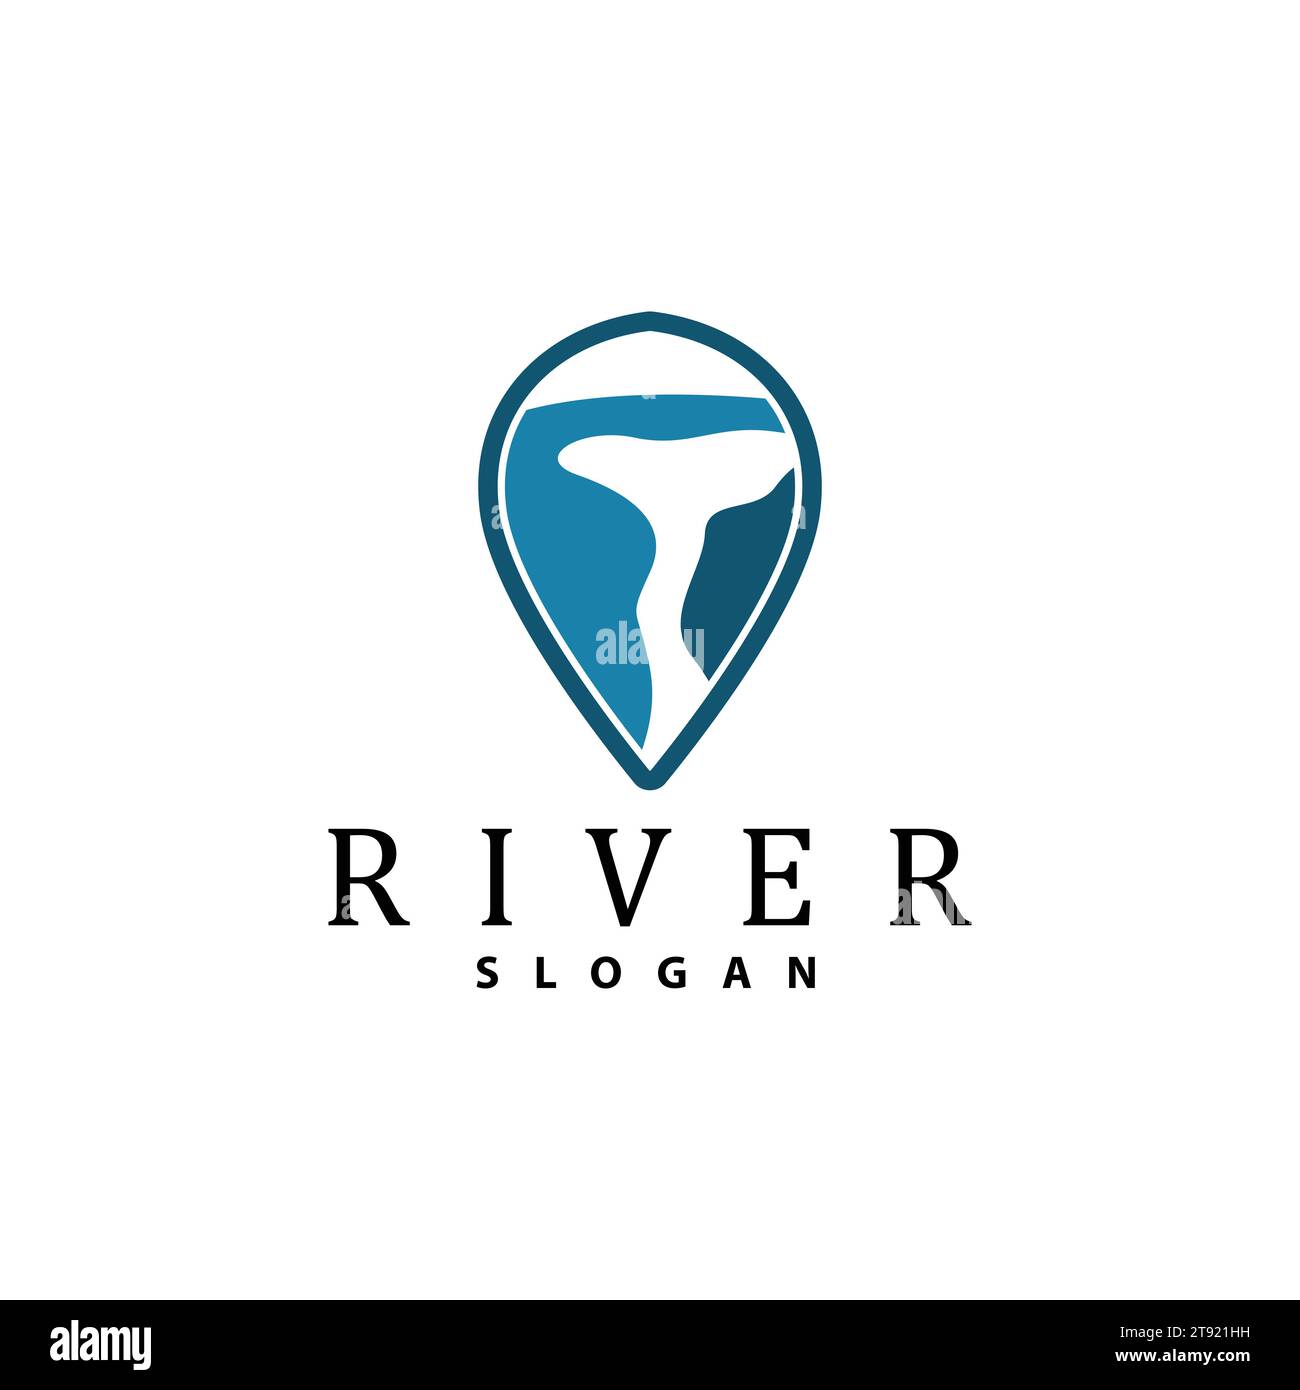 River Logo Design, River Creek Vector, Riverside Illustration With A Combination Of Mountains And Nature, Product Brand Stock Vector